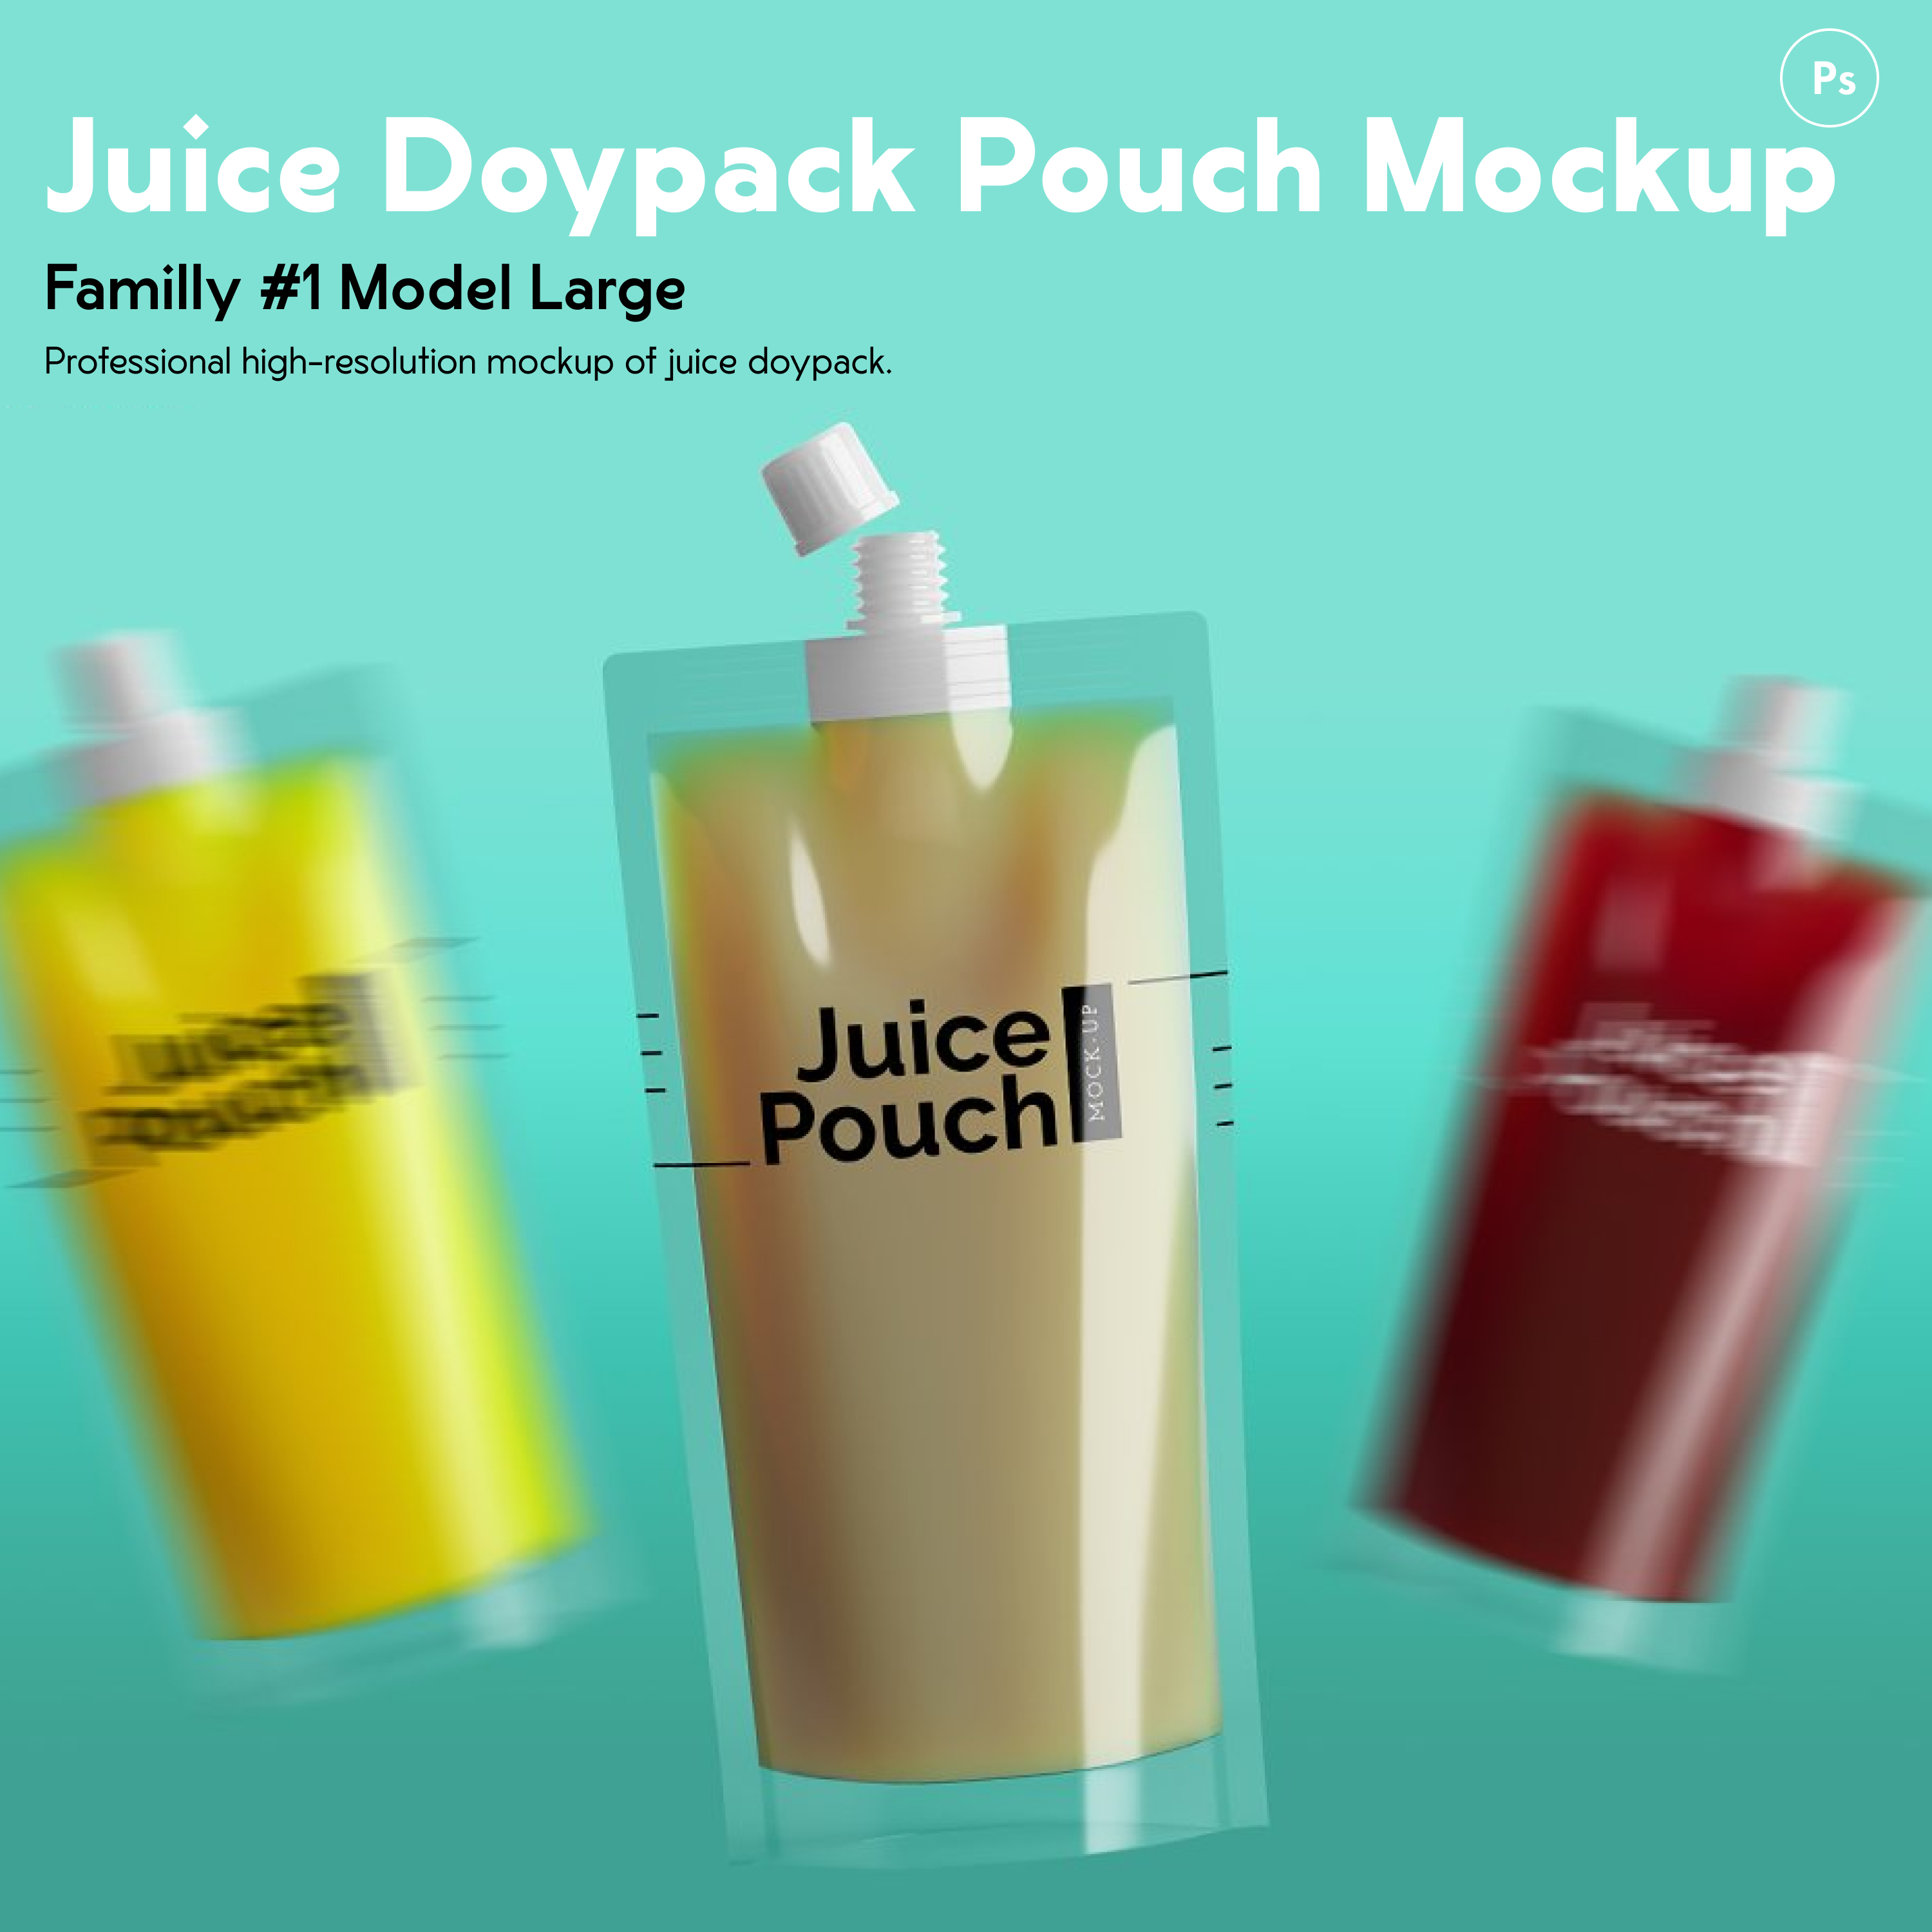 Pints of juice doypack pouch mockup.